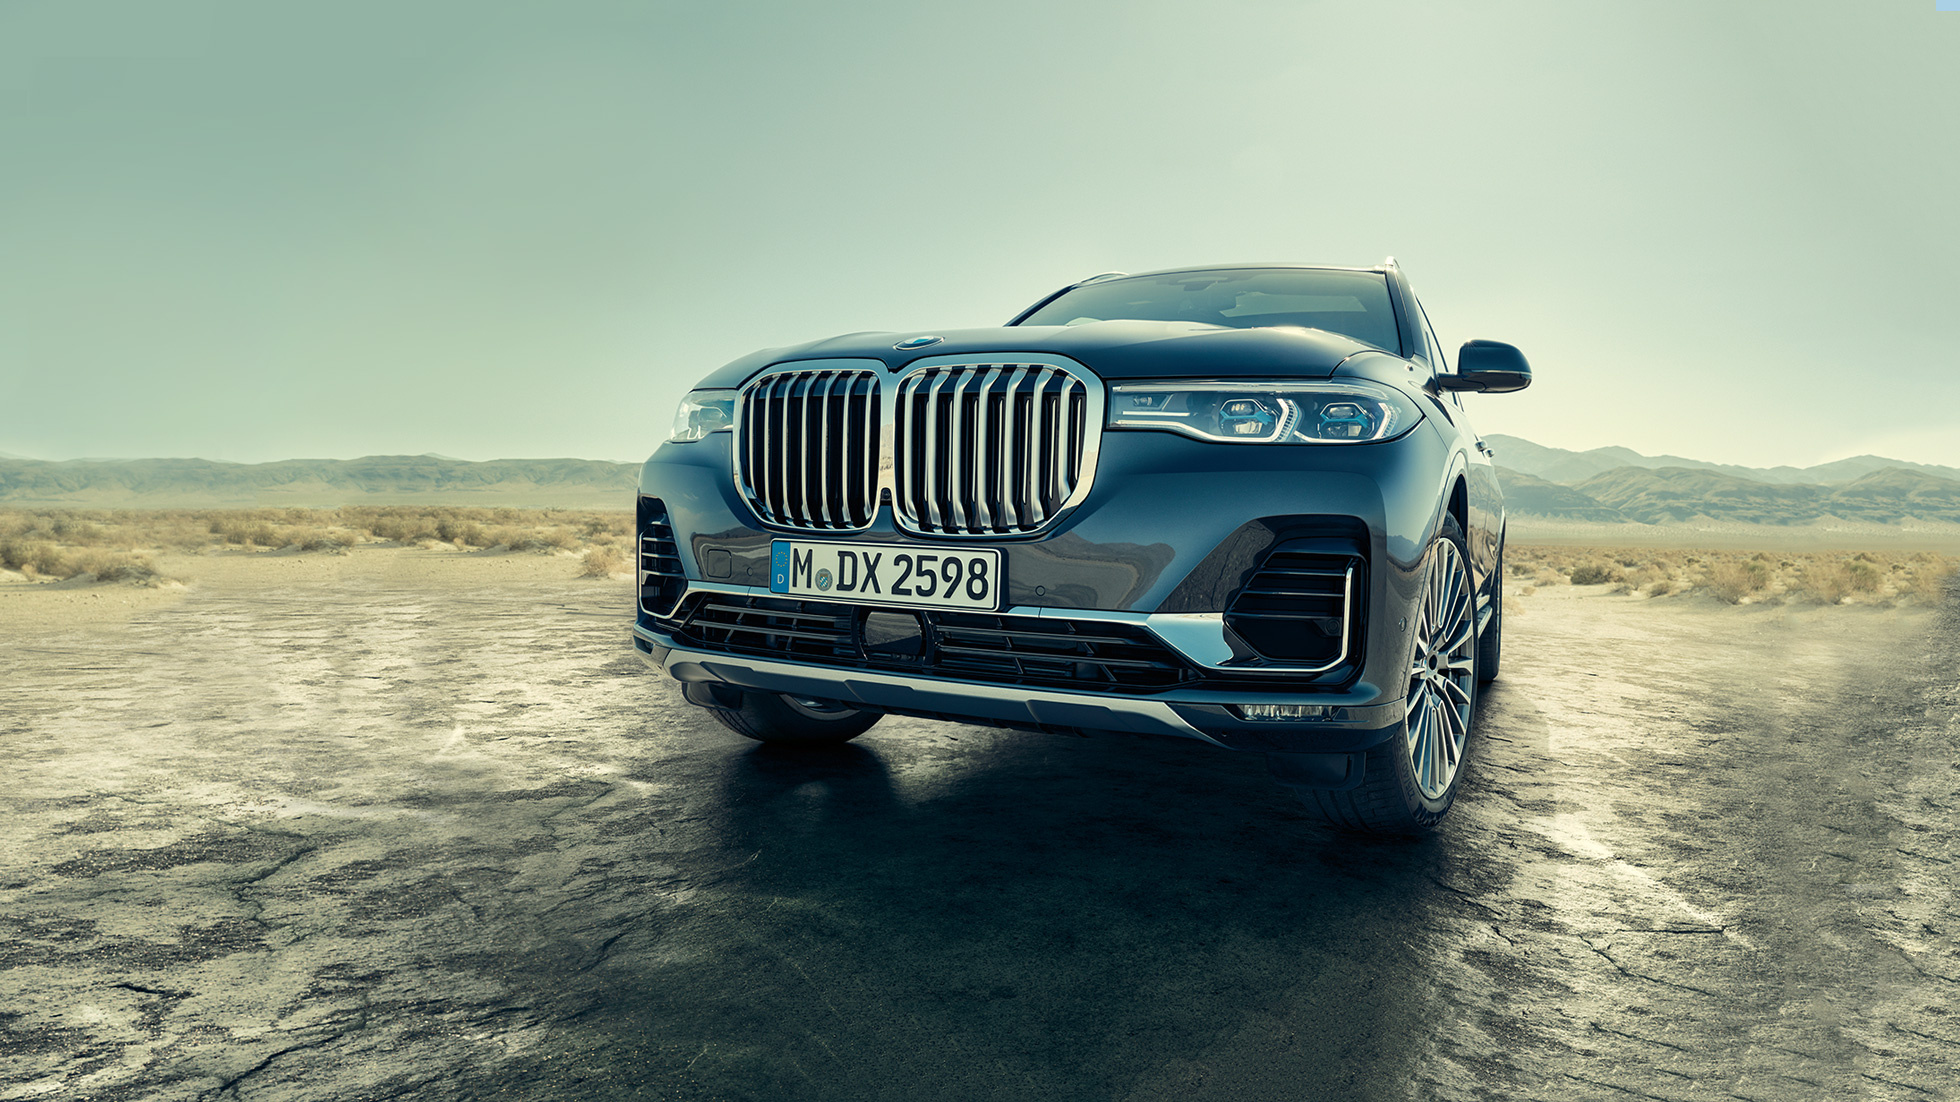 BMW X7, Sav of luxury, High-end features, Exquisite style, 1960x1110 HD Desktop